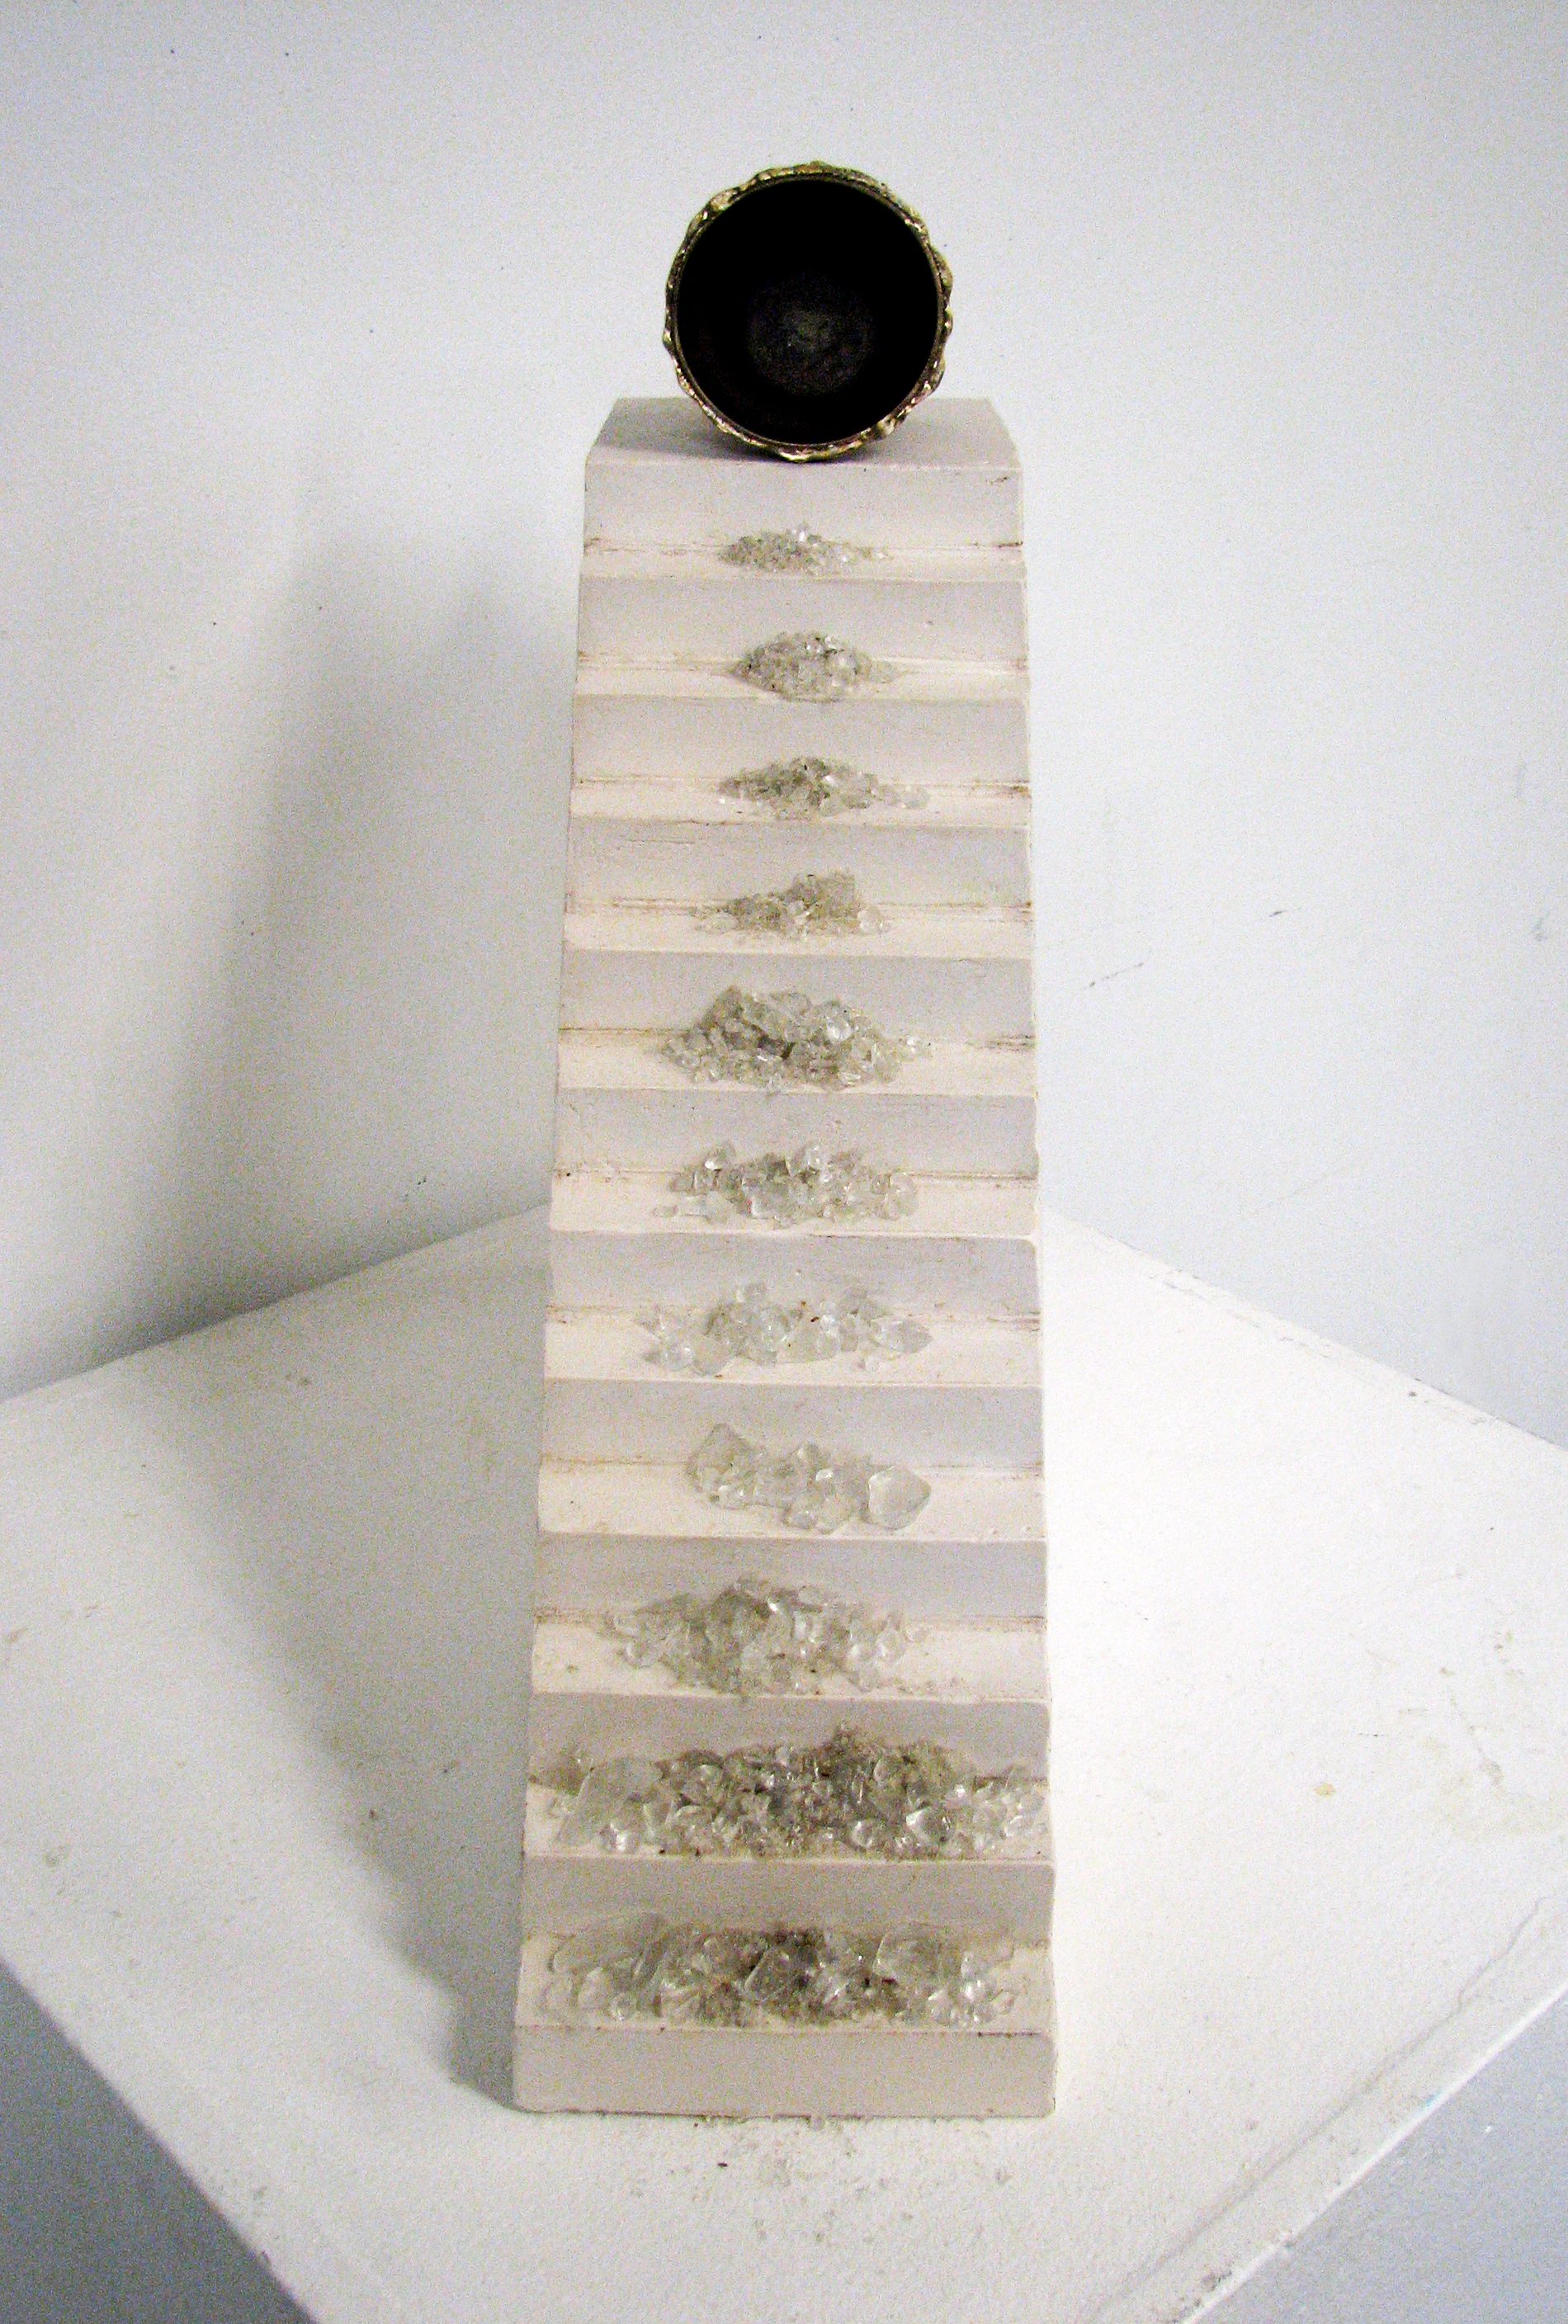  “The Only Requirement”  cast bronze, glass, and plaster  18” x 6” x 20”  2009 